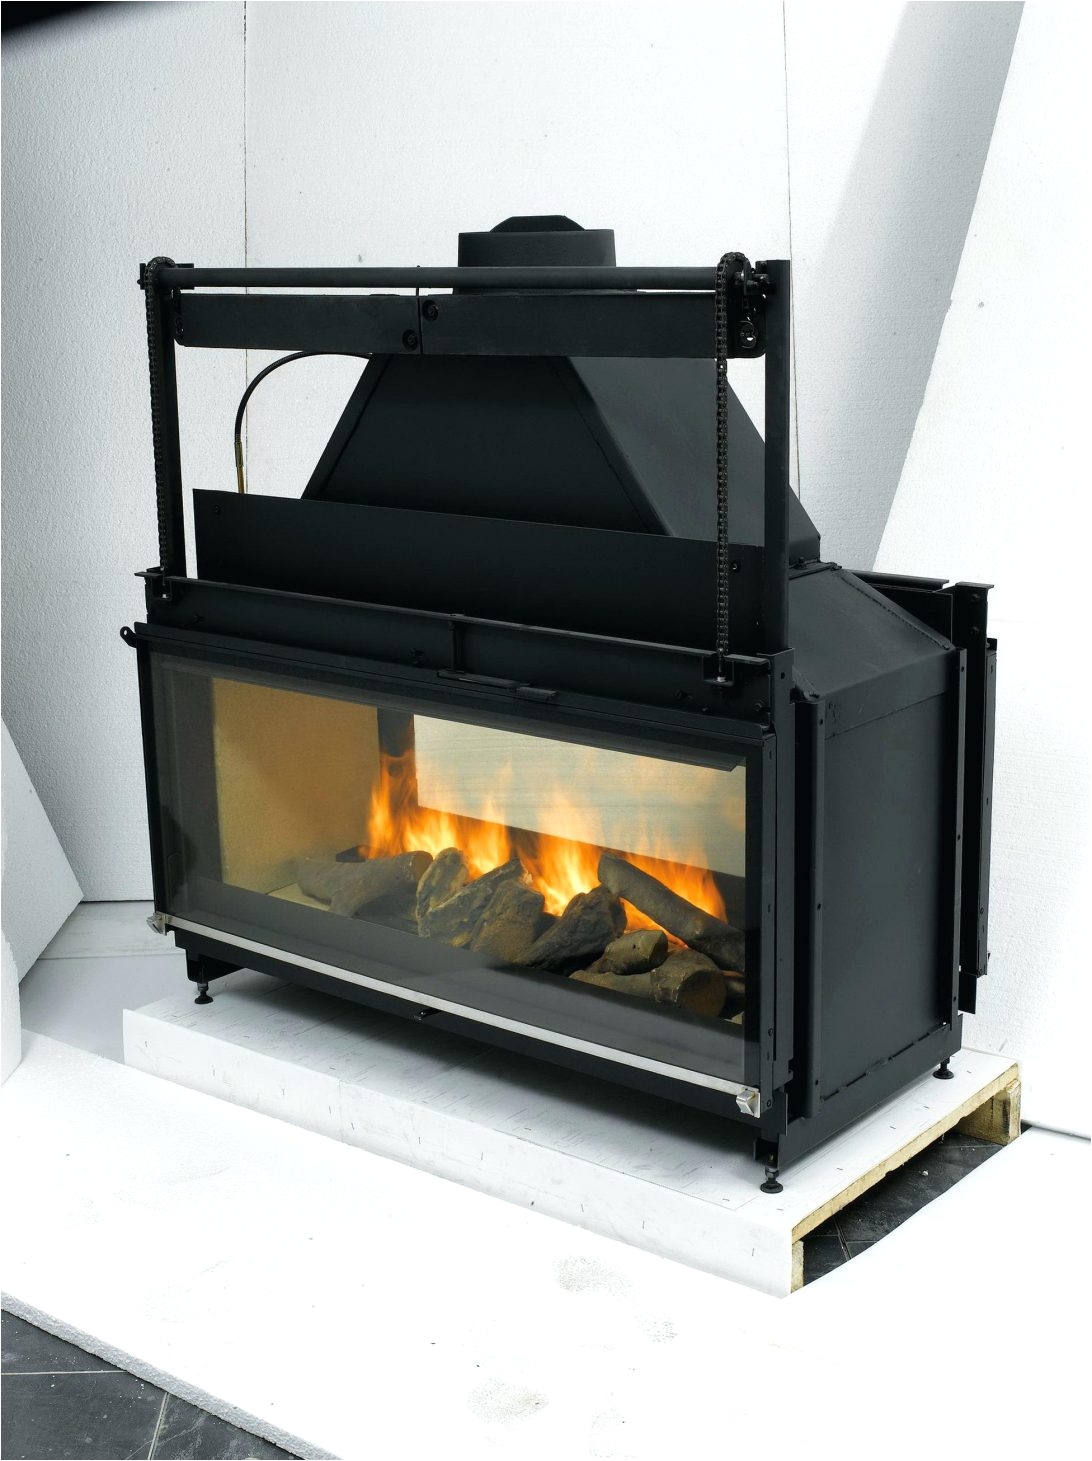 temtex fireplace manuals 67 most ace mendota fireplace troubleshooting natural gas inserts of temtex fireplace manuals